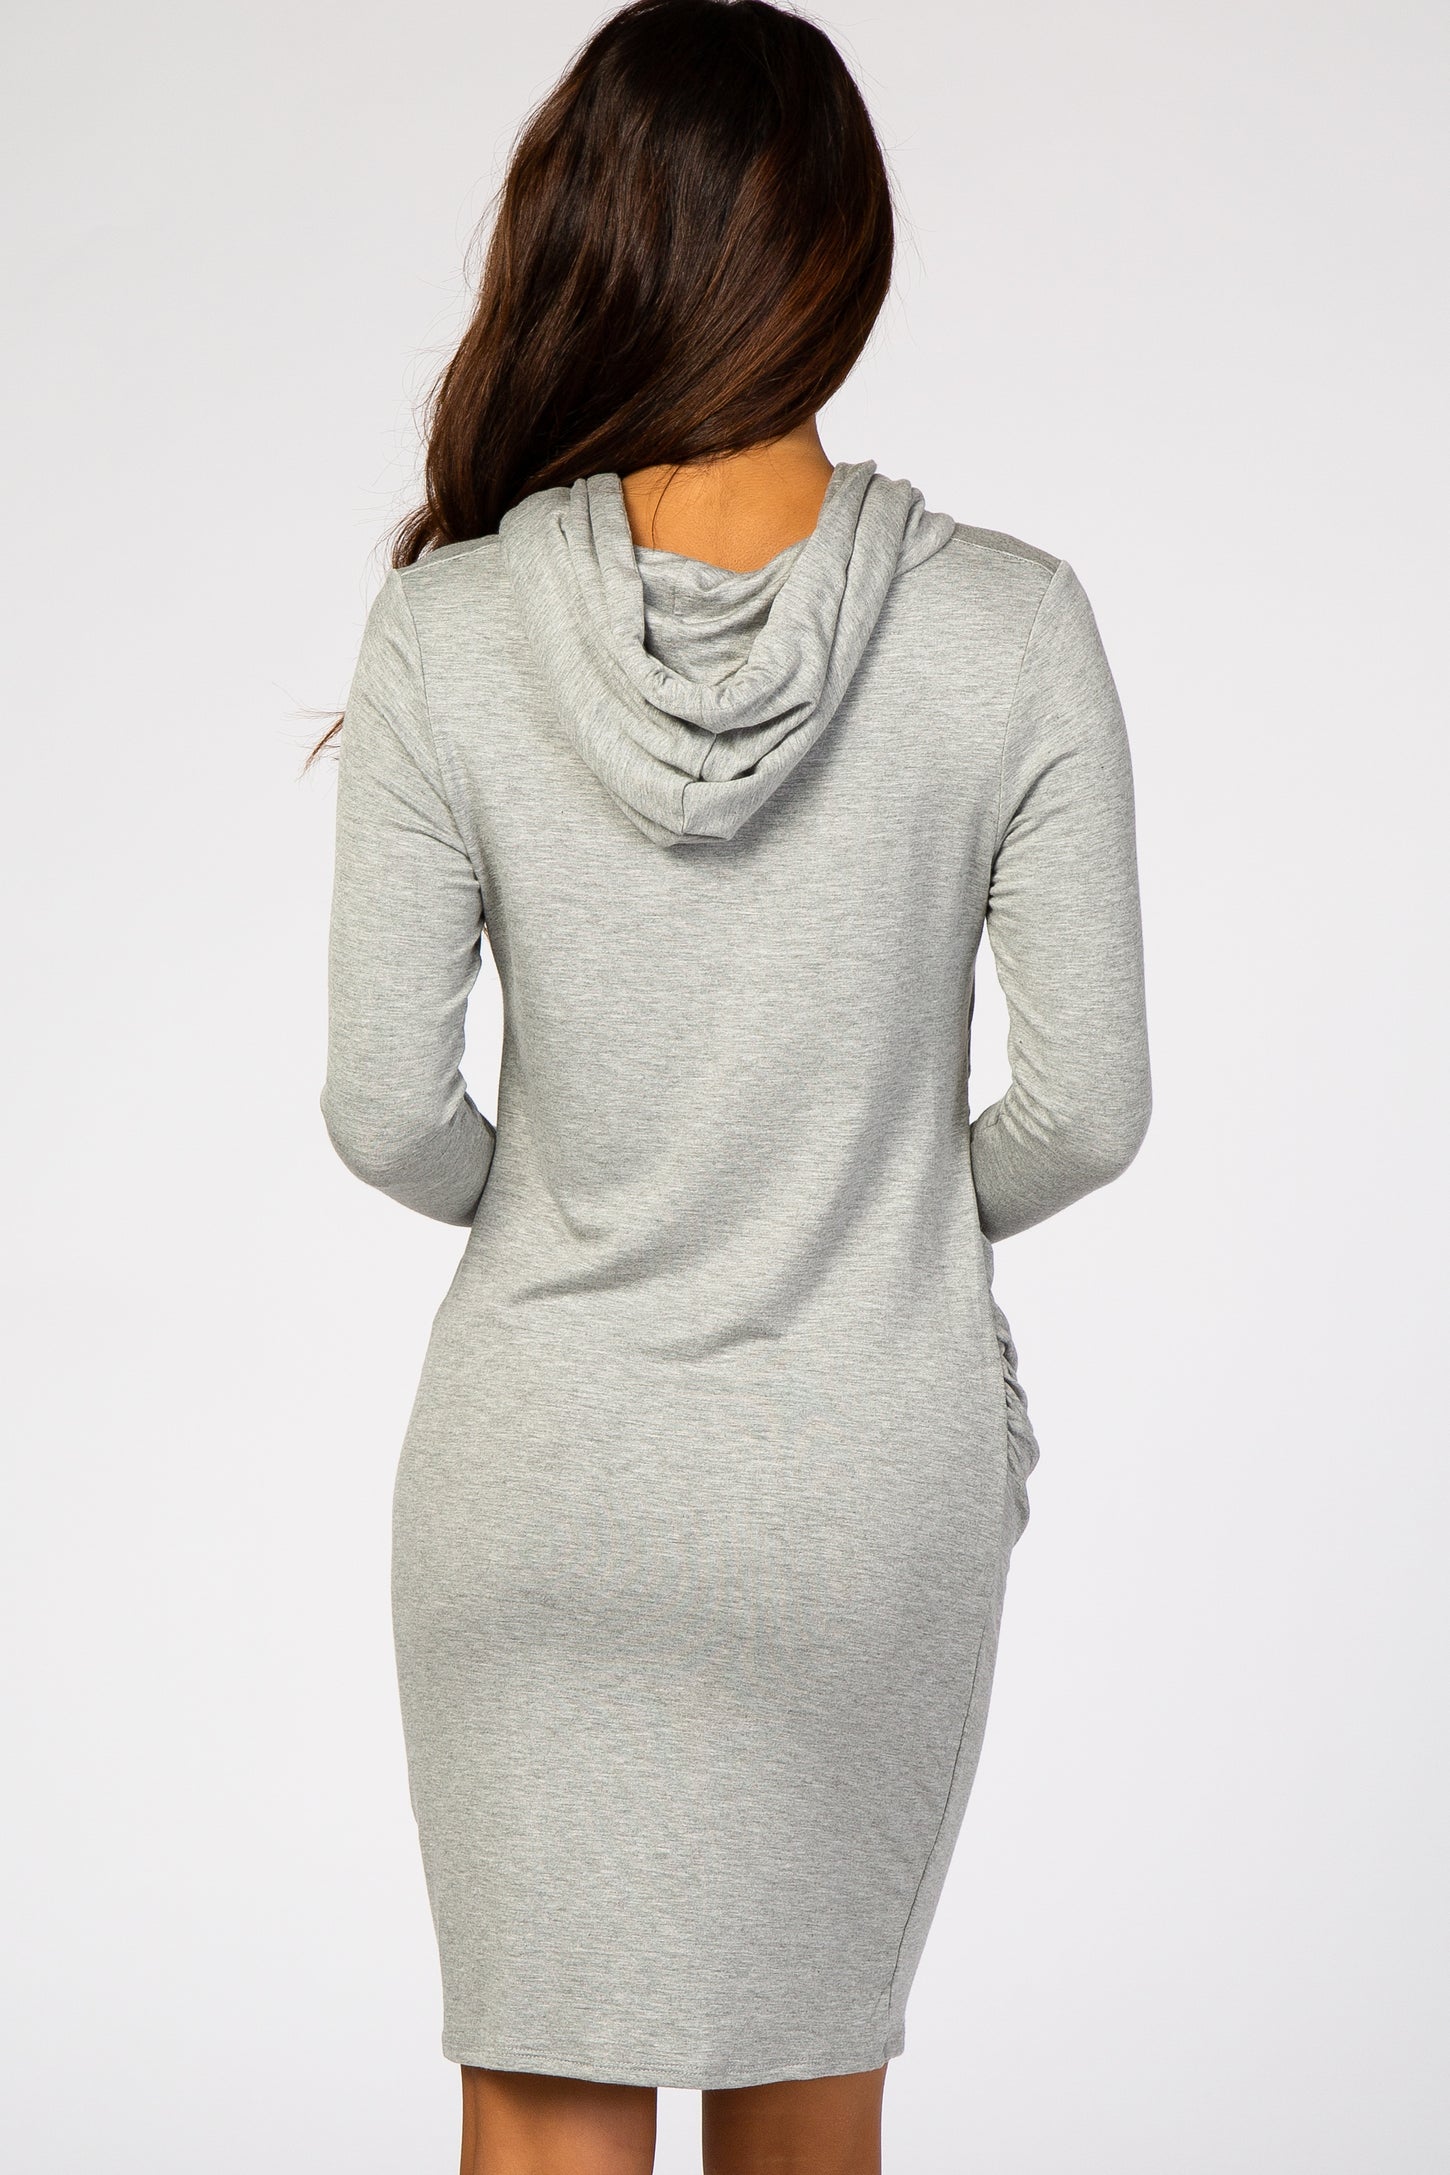 Heather Grey Ruched Hooded Dress